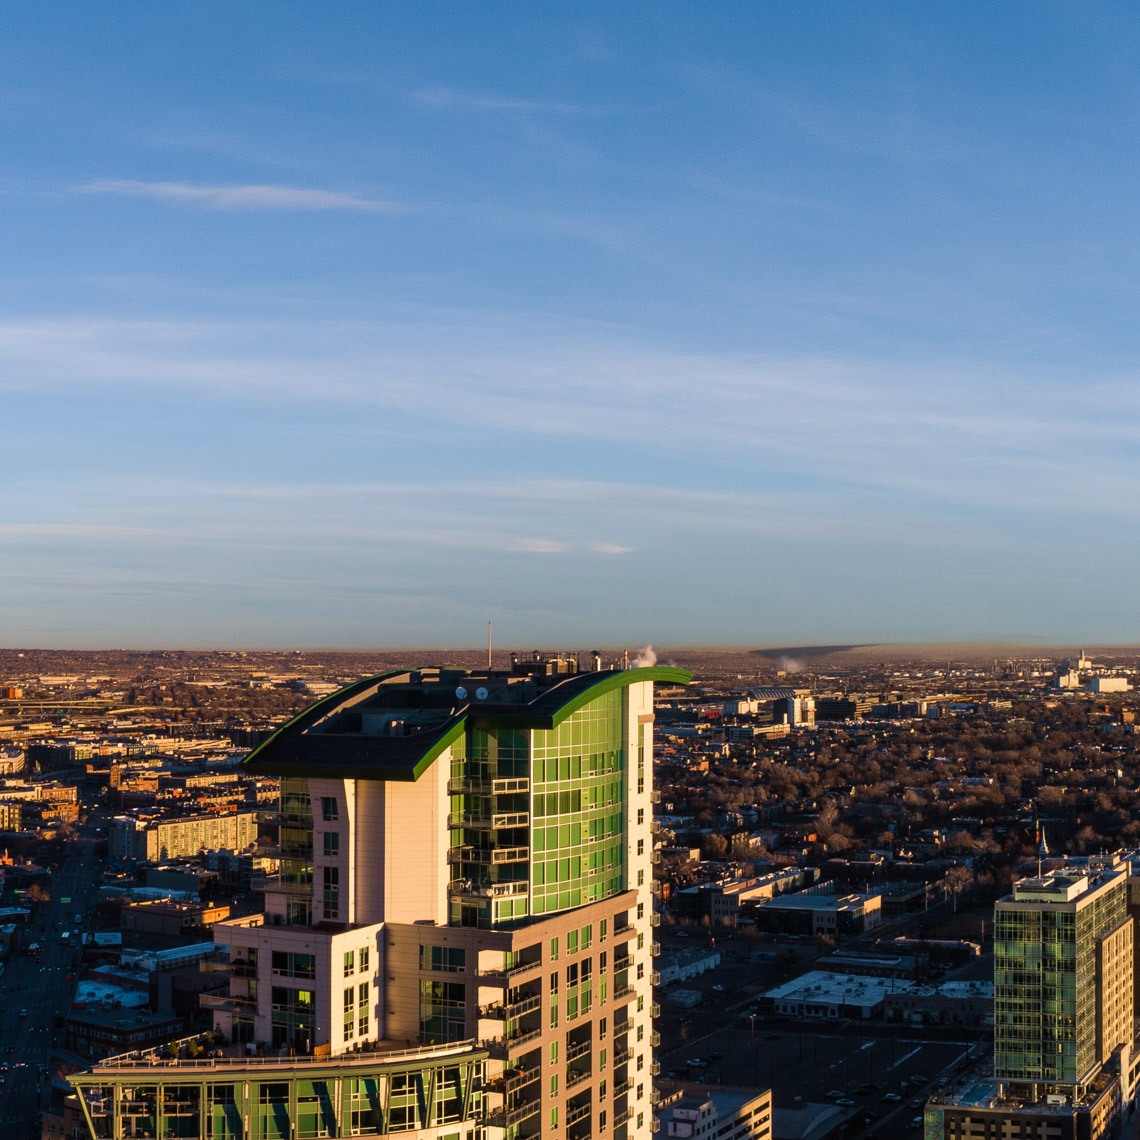 20201208-pW-188841-Pano-1